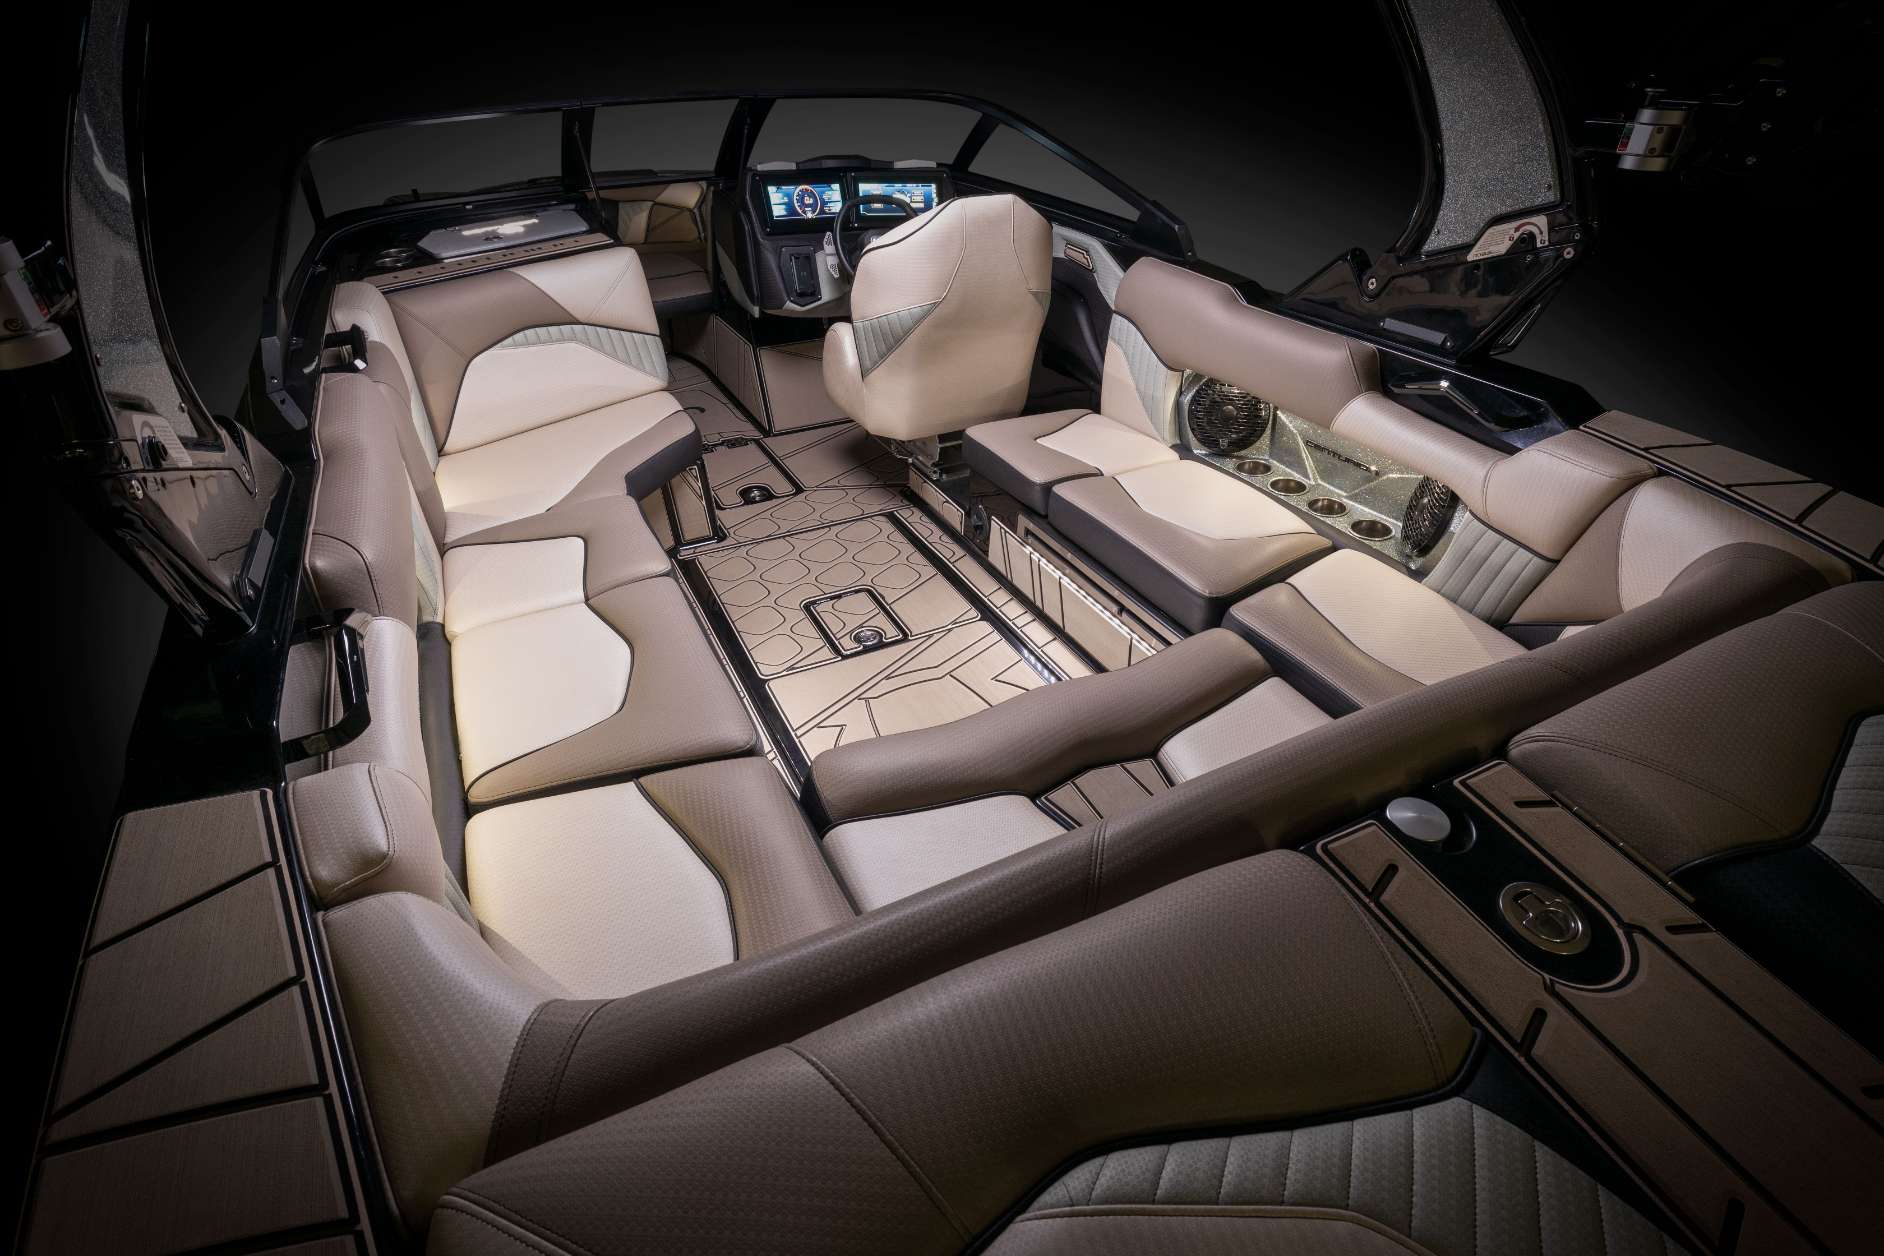 The interior of a wakesurf boat with leather seats.